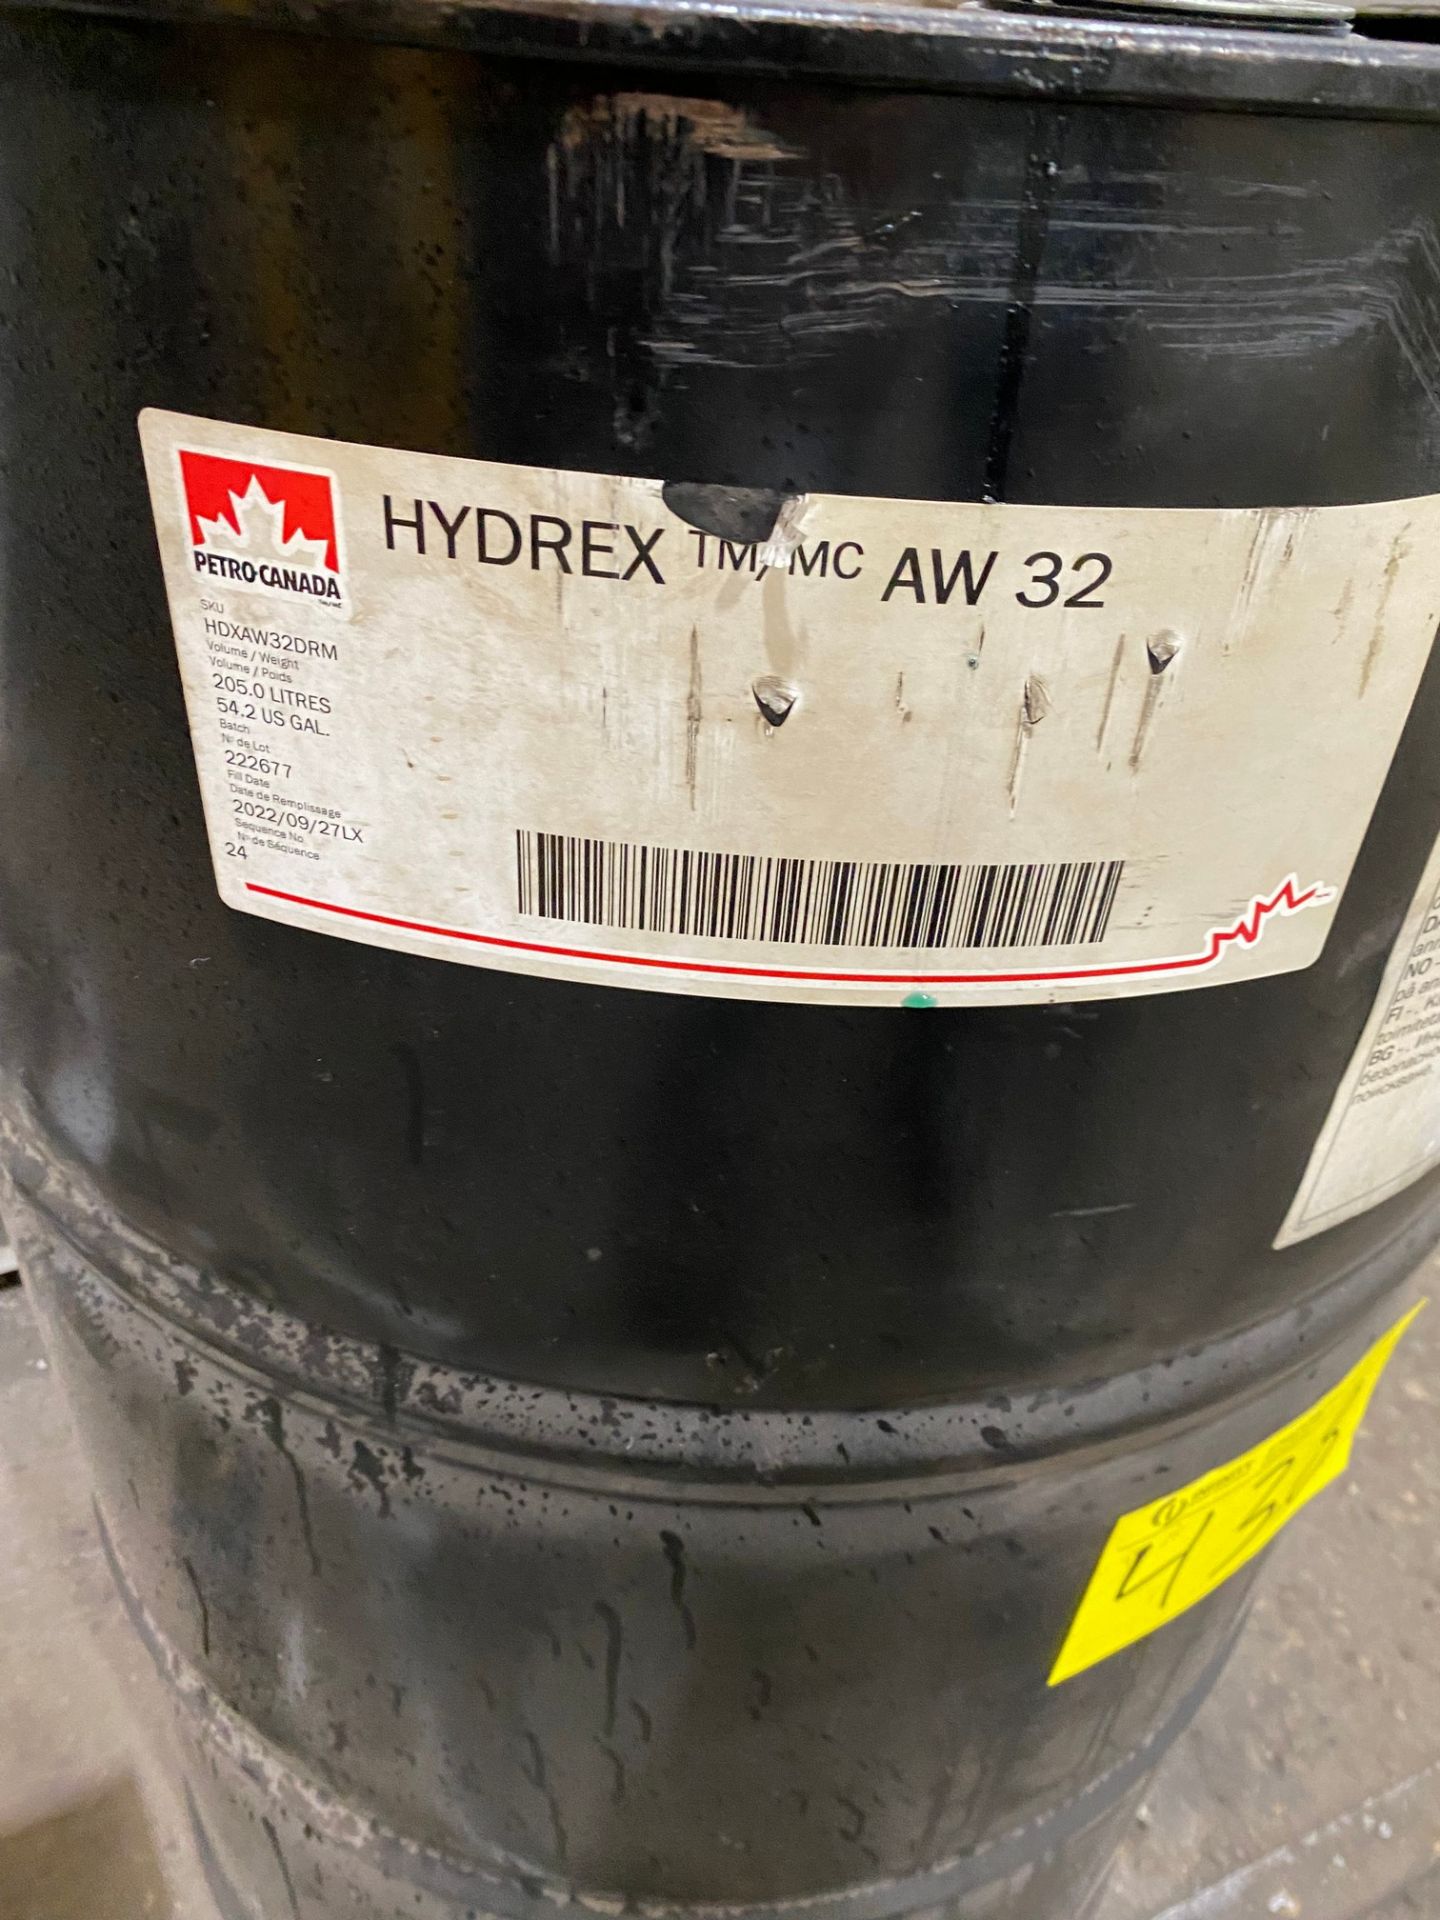 55-GAL DUM OF HYDREX AW-32 OIL - Image 2 of 3